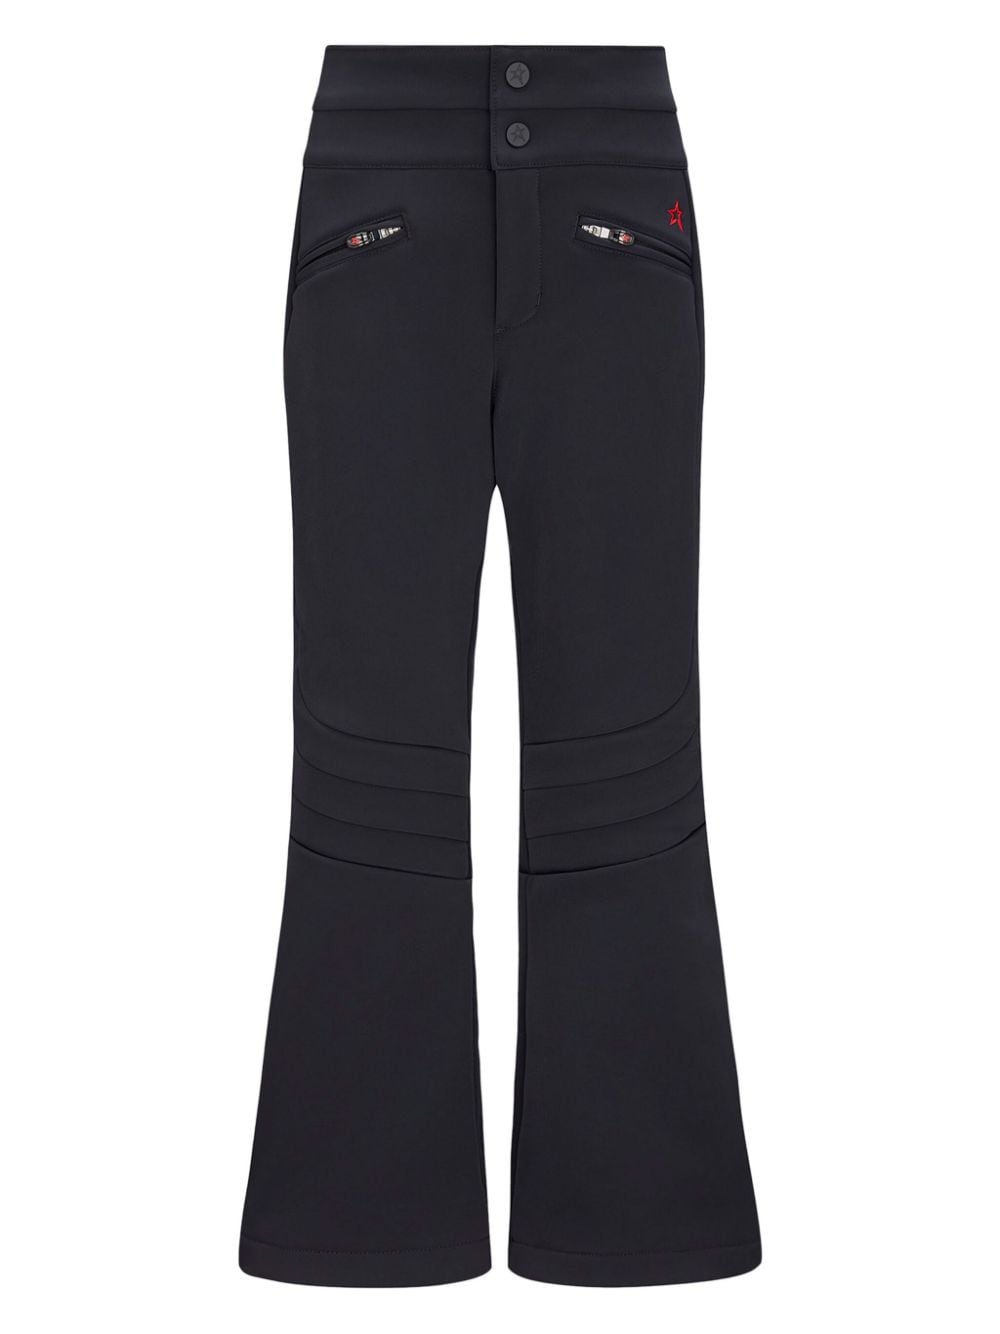 Perfect Moment Ski Pants - Houndstooth Aurora High Waist Flare Pant Pink  Size XS - $280 (42% Off Retail) - From Belle